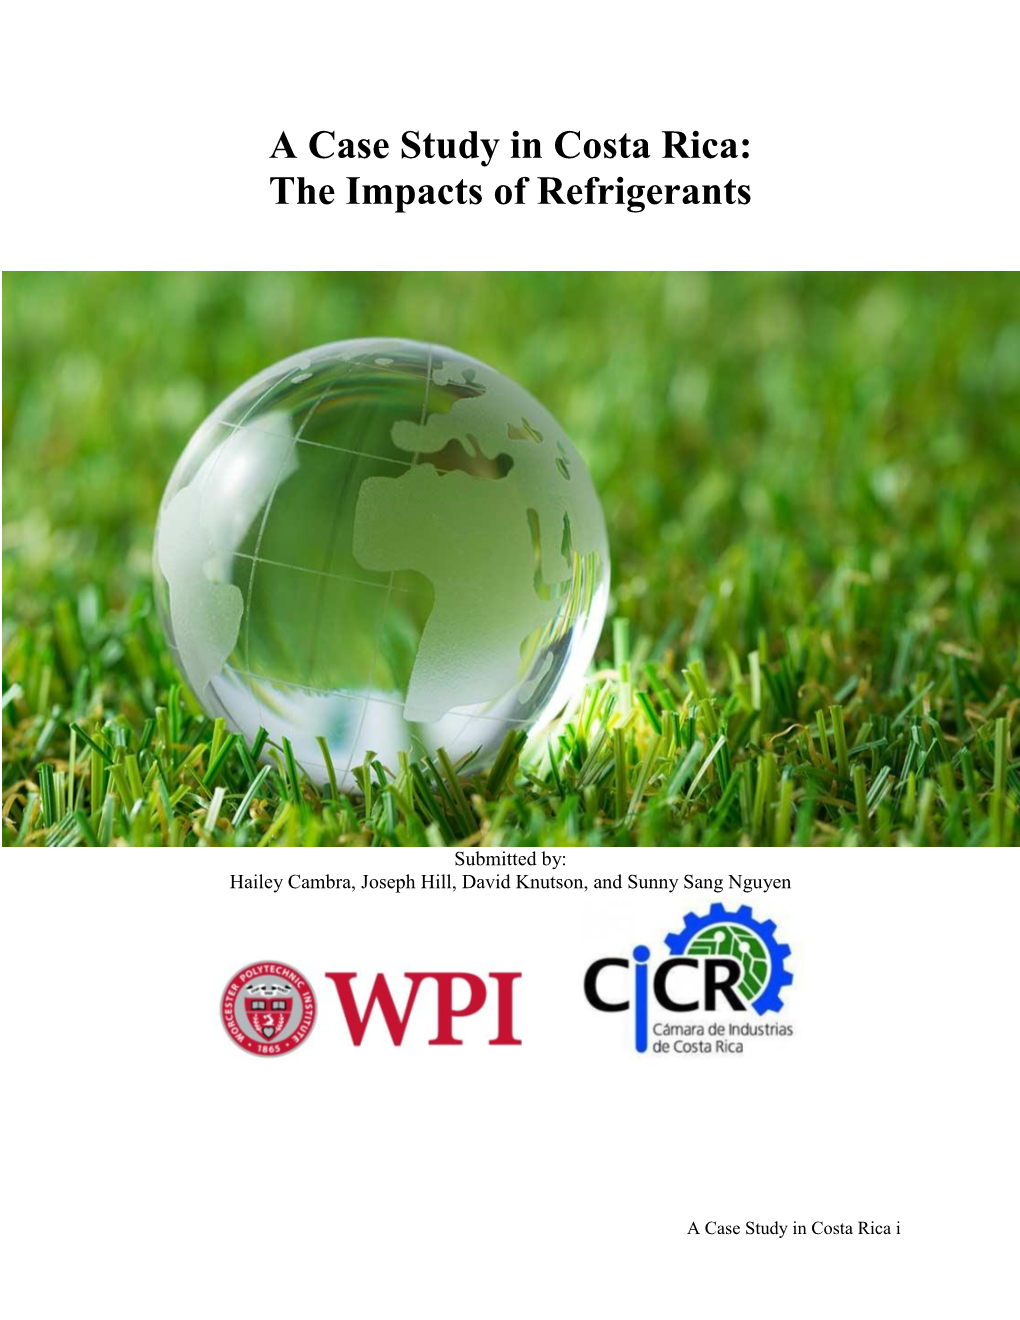 A Case Study in Costa Rica: the Impacts of Refrigerants